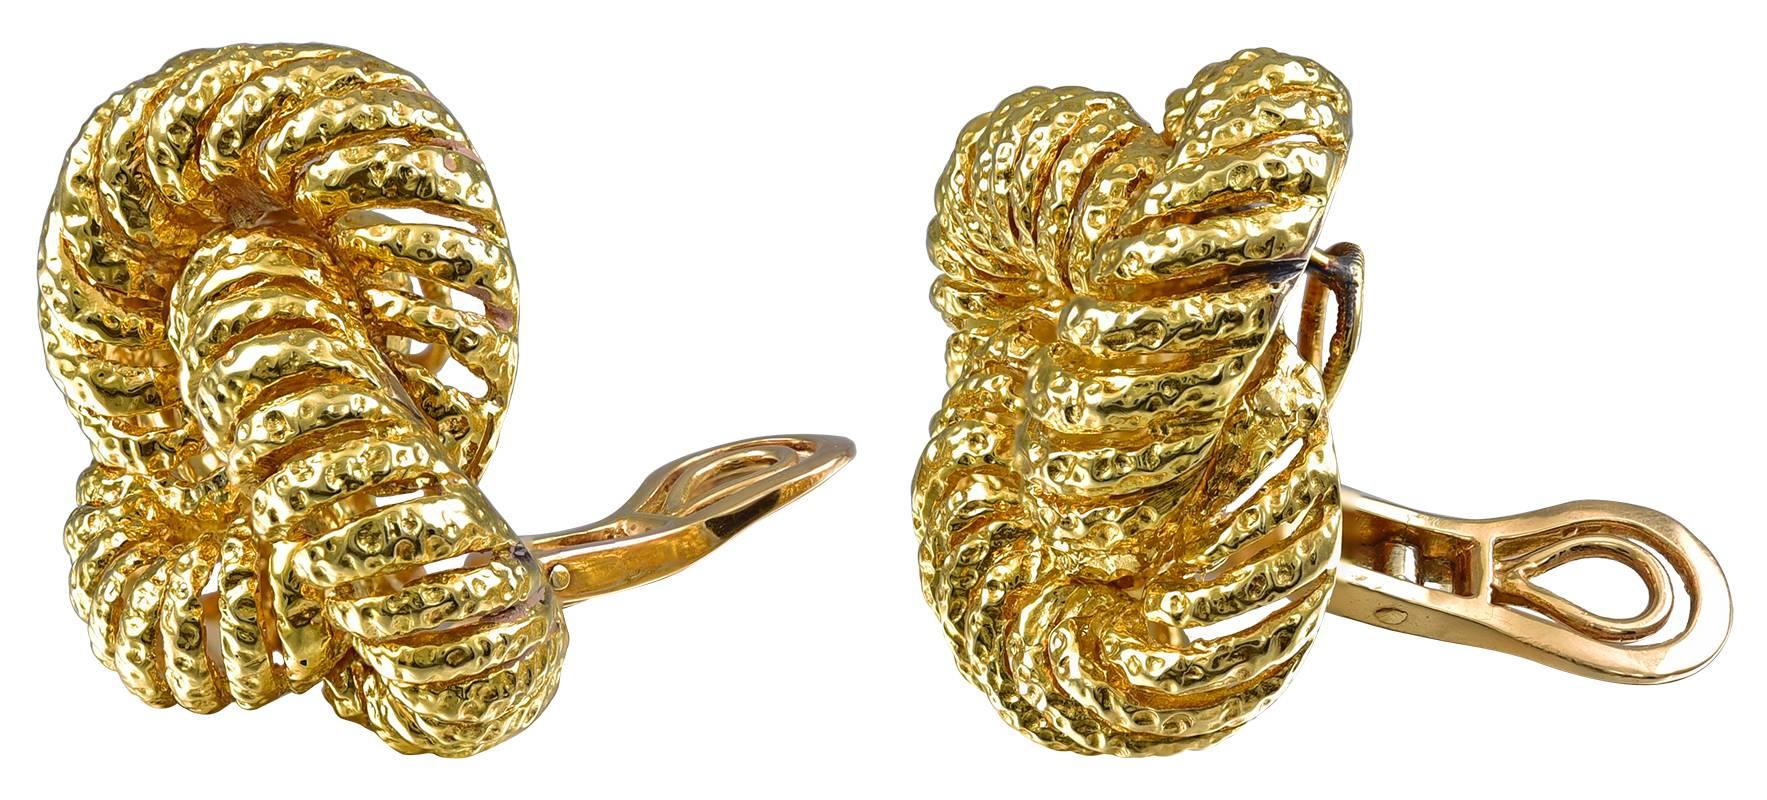 Van Cleef & Arpels Paris Gold Knot Earclips In Excellent Condition For Sale In New York, NY